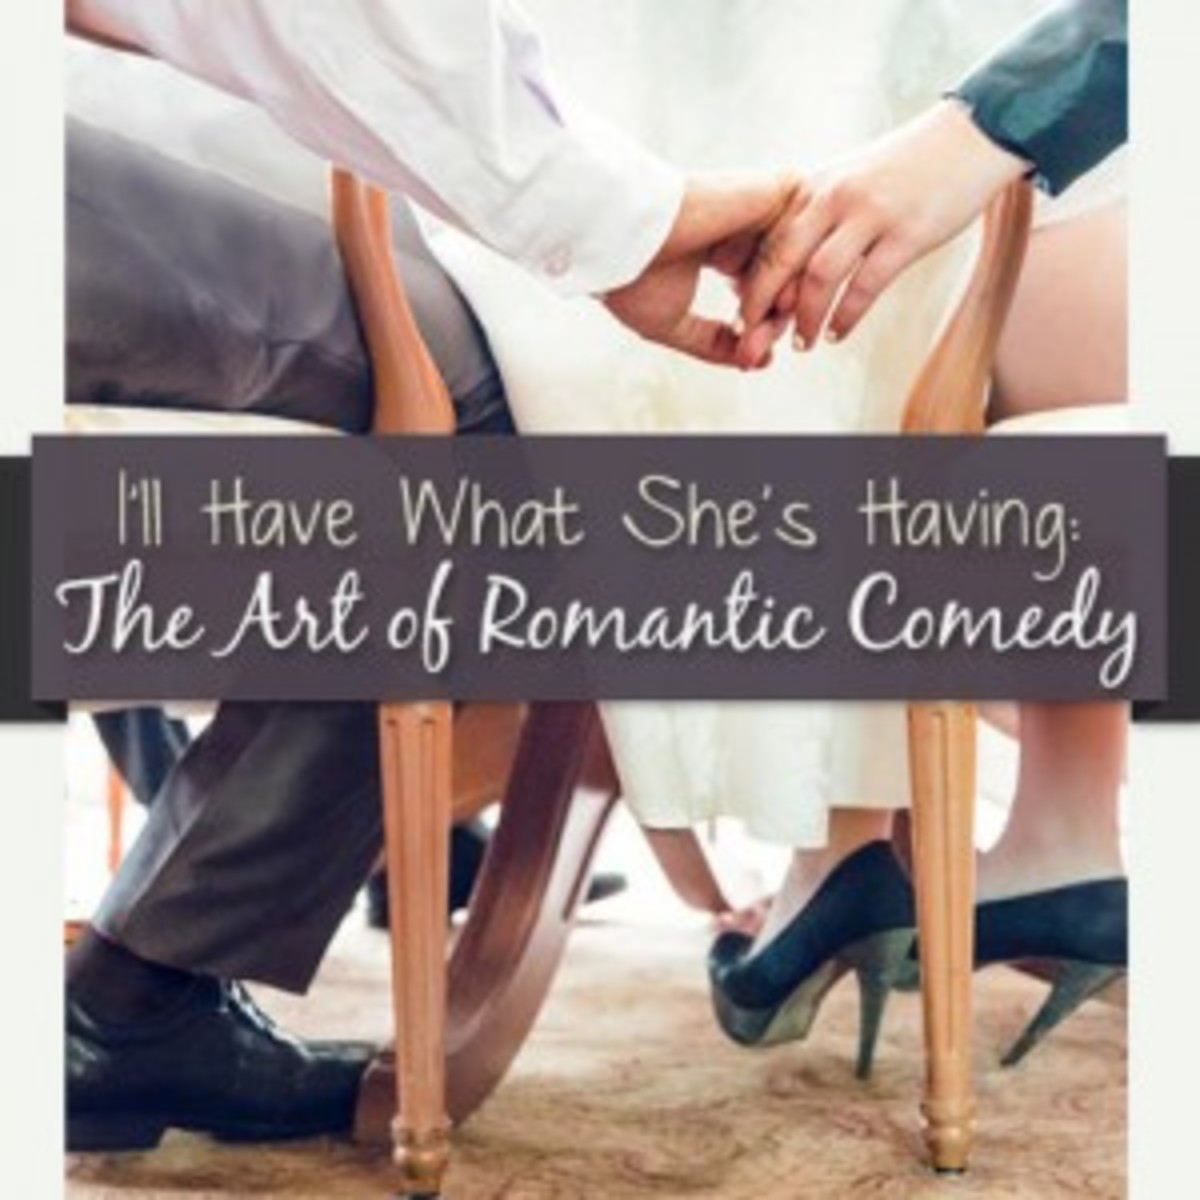 "I'll Have What She's Having": The Art of Romantic Comedy